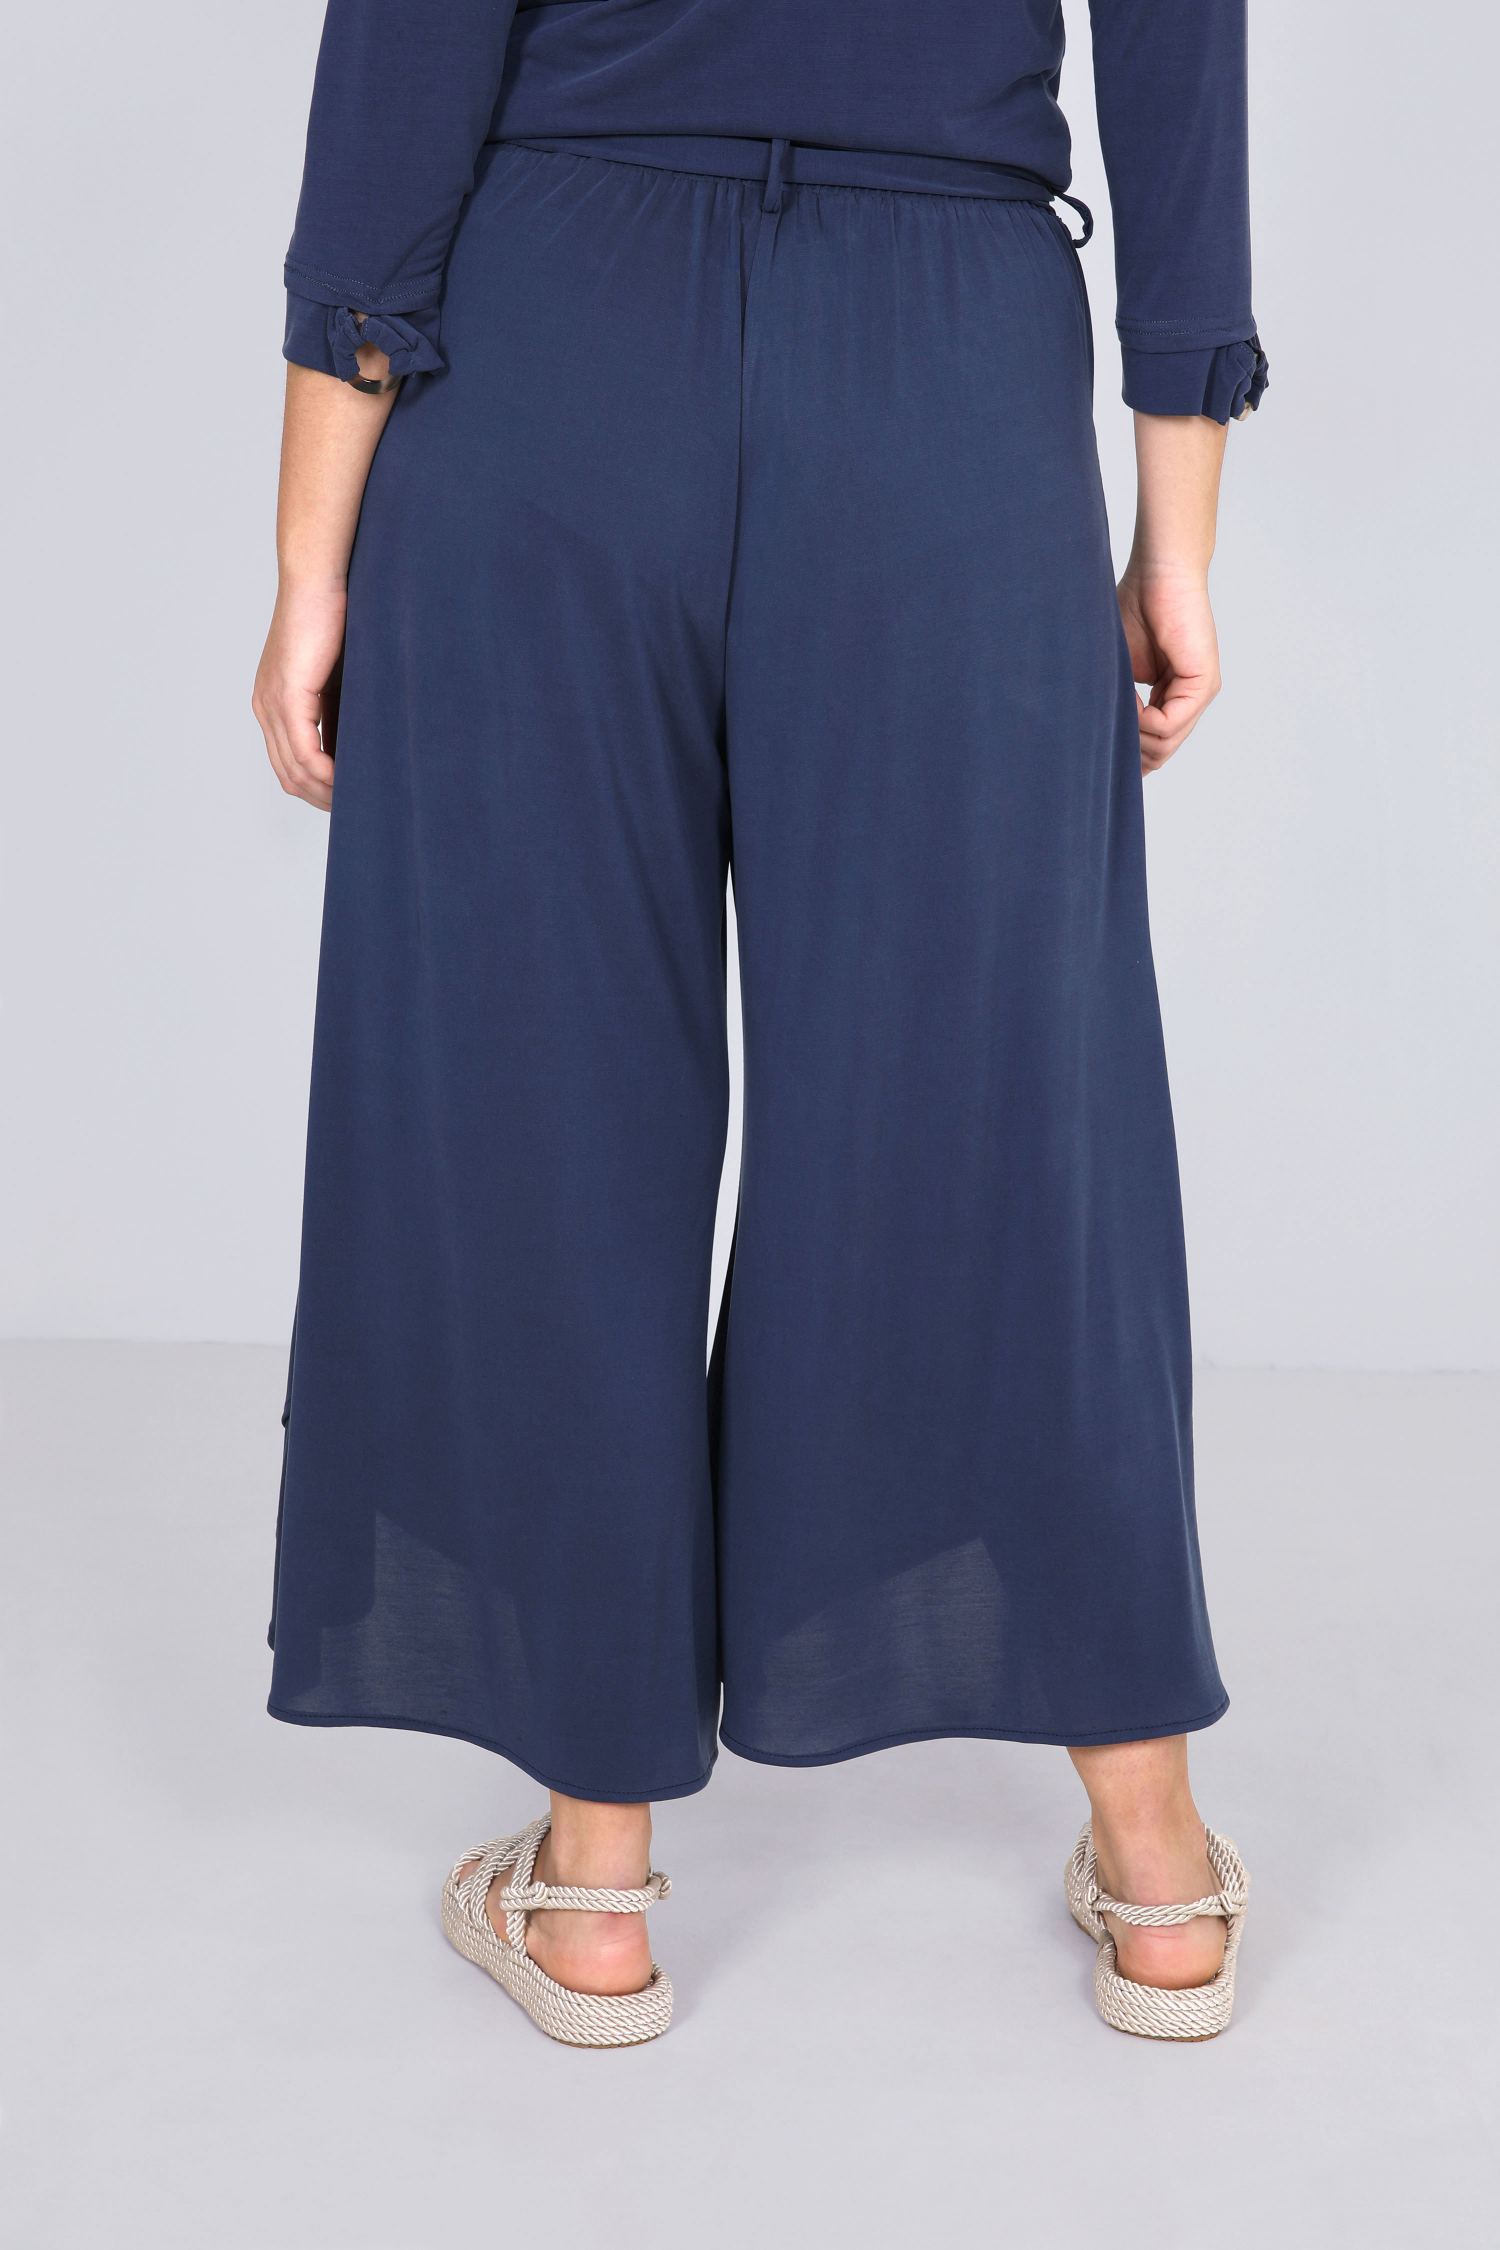 Pant style culottes in plain knit.